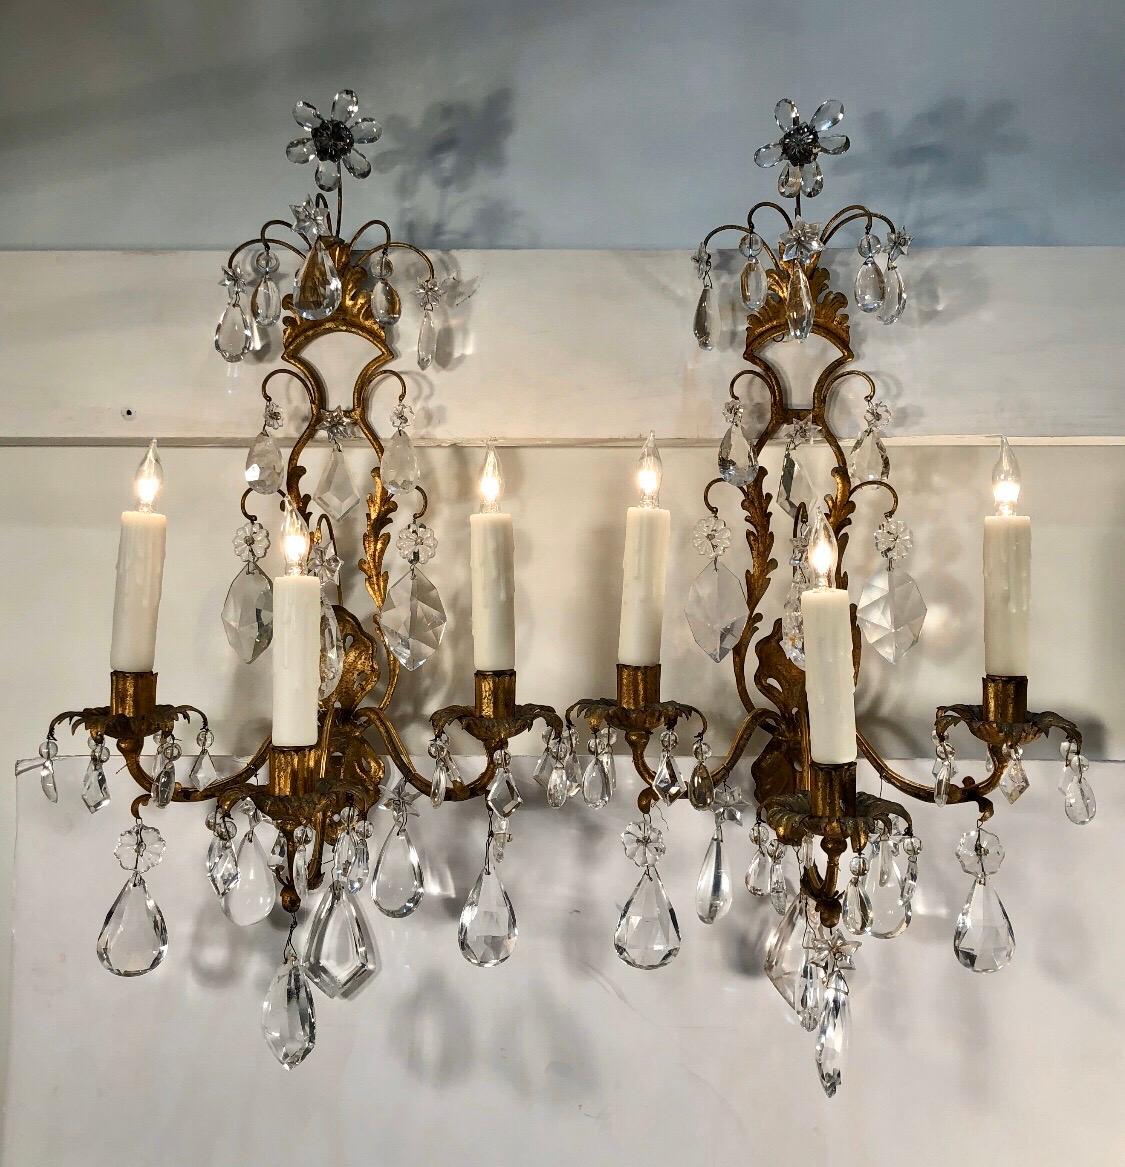 Pair of regal 19th century piedmont, Italy gilt Tôle rock crystal sconces. Each sconces has an iron frame wrapped in Tôle gilt Foliages with gilt floral bobeches that were originally candle.